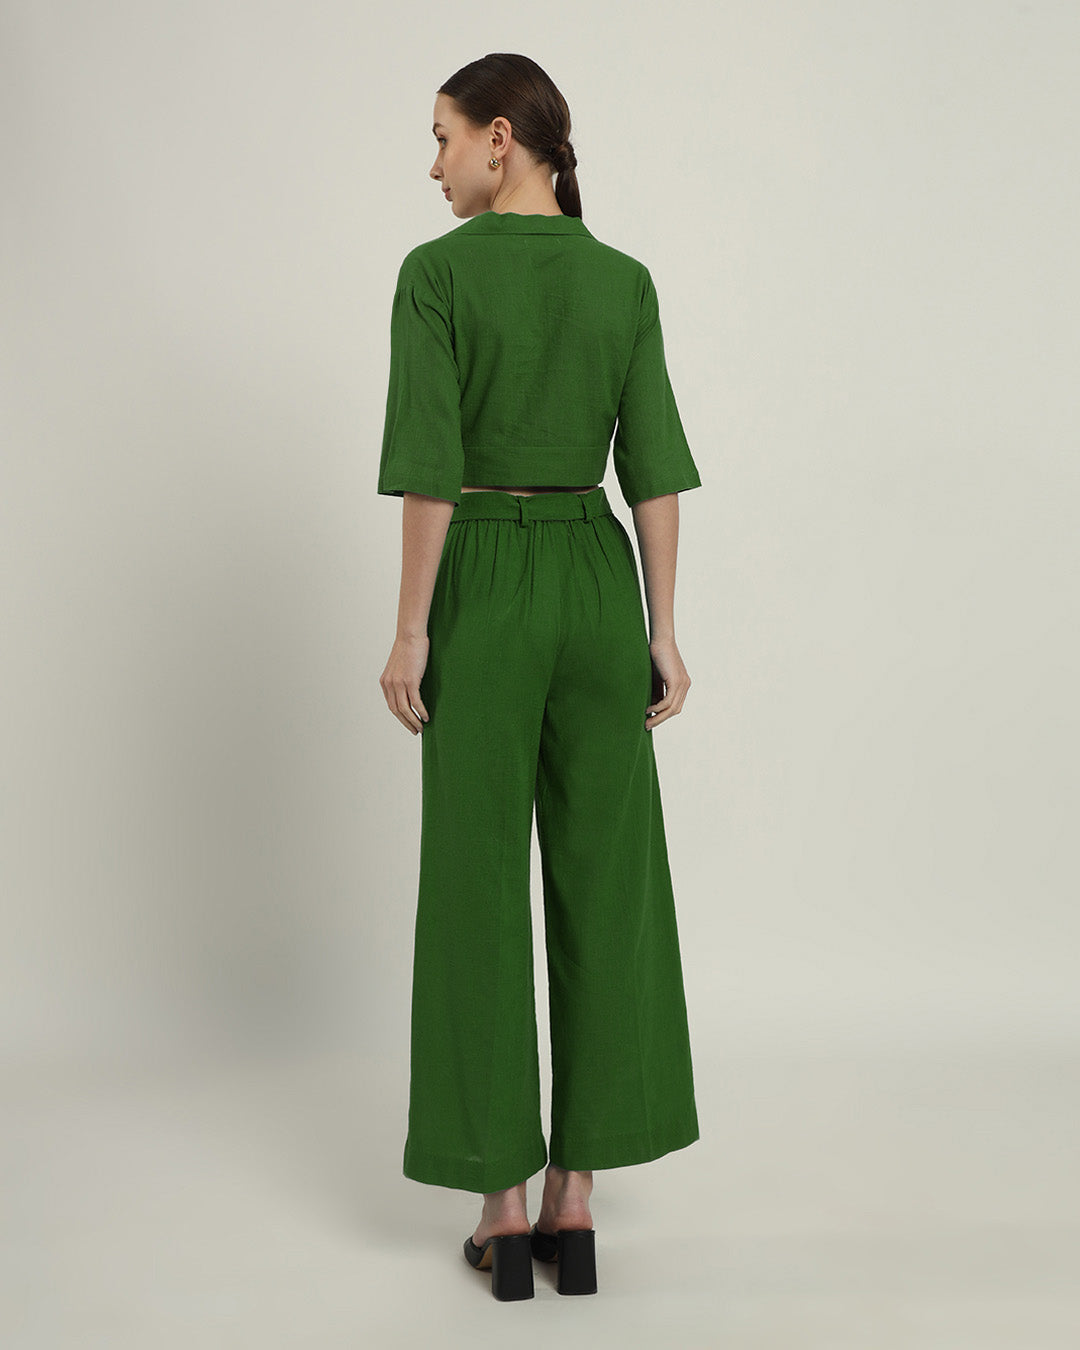 V Graceful Gathers Crop Solid Emerald Top (Without Bottoms)